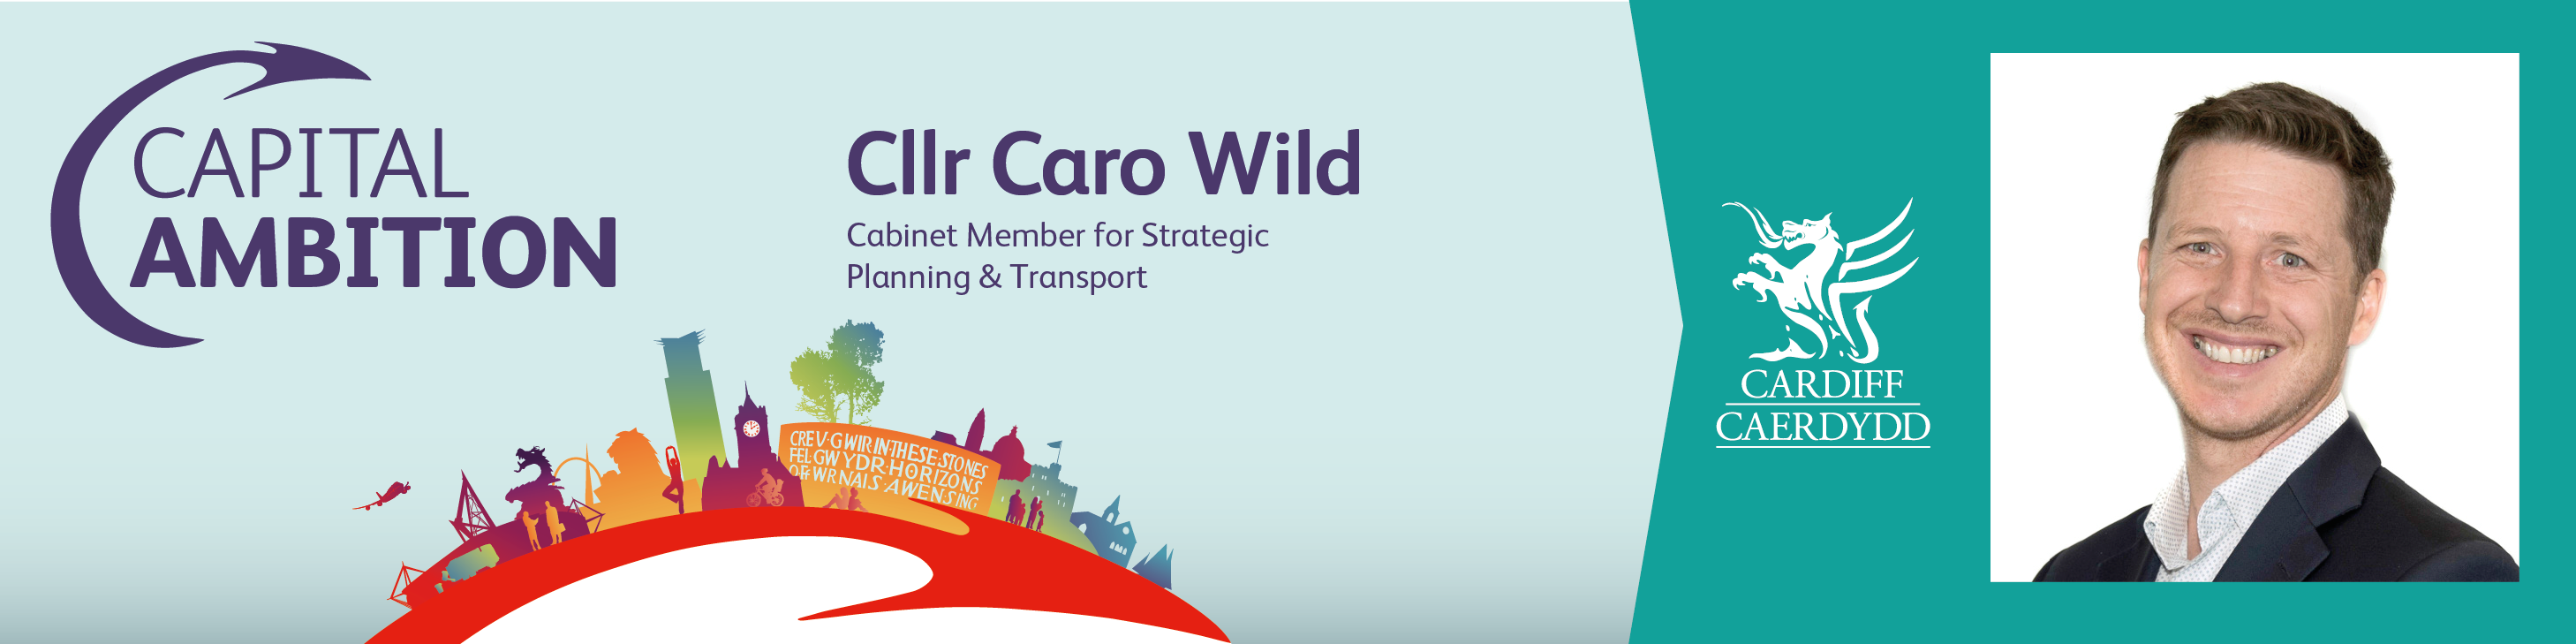 Image of Councillor Caro Wild and Cardiff's Capital Ambition logo